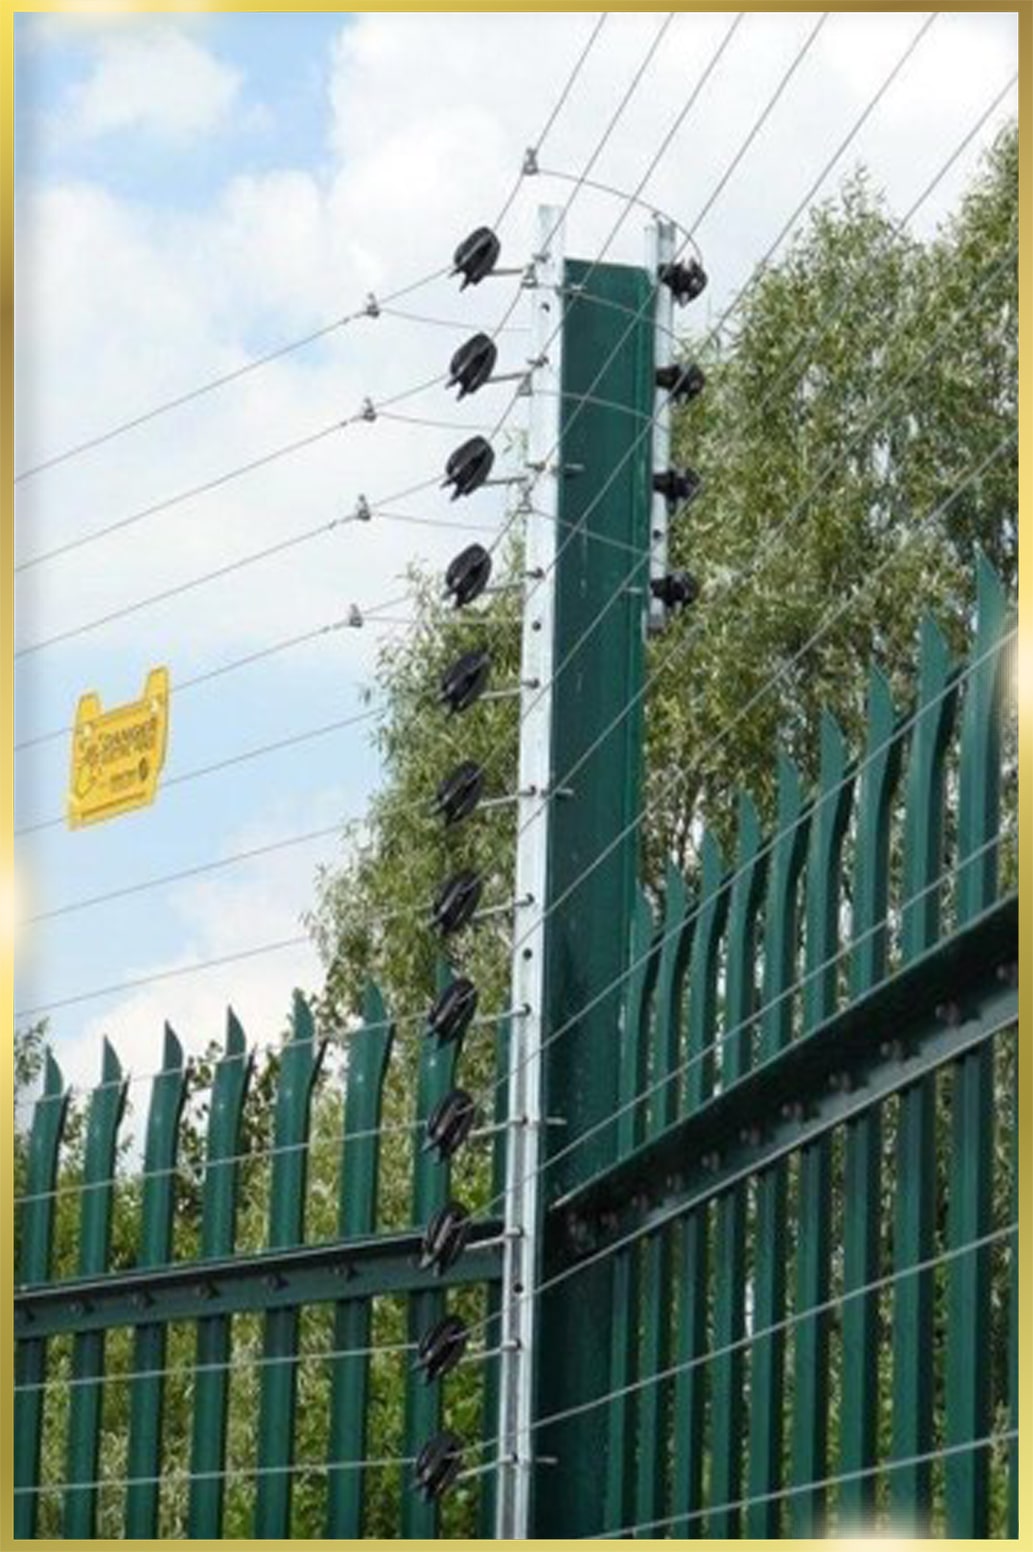 Hotwire Electric Fence Suppliers